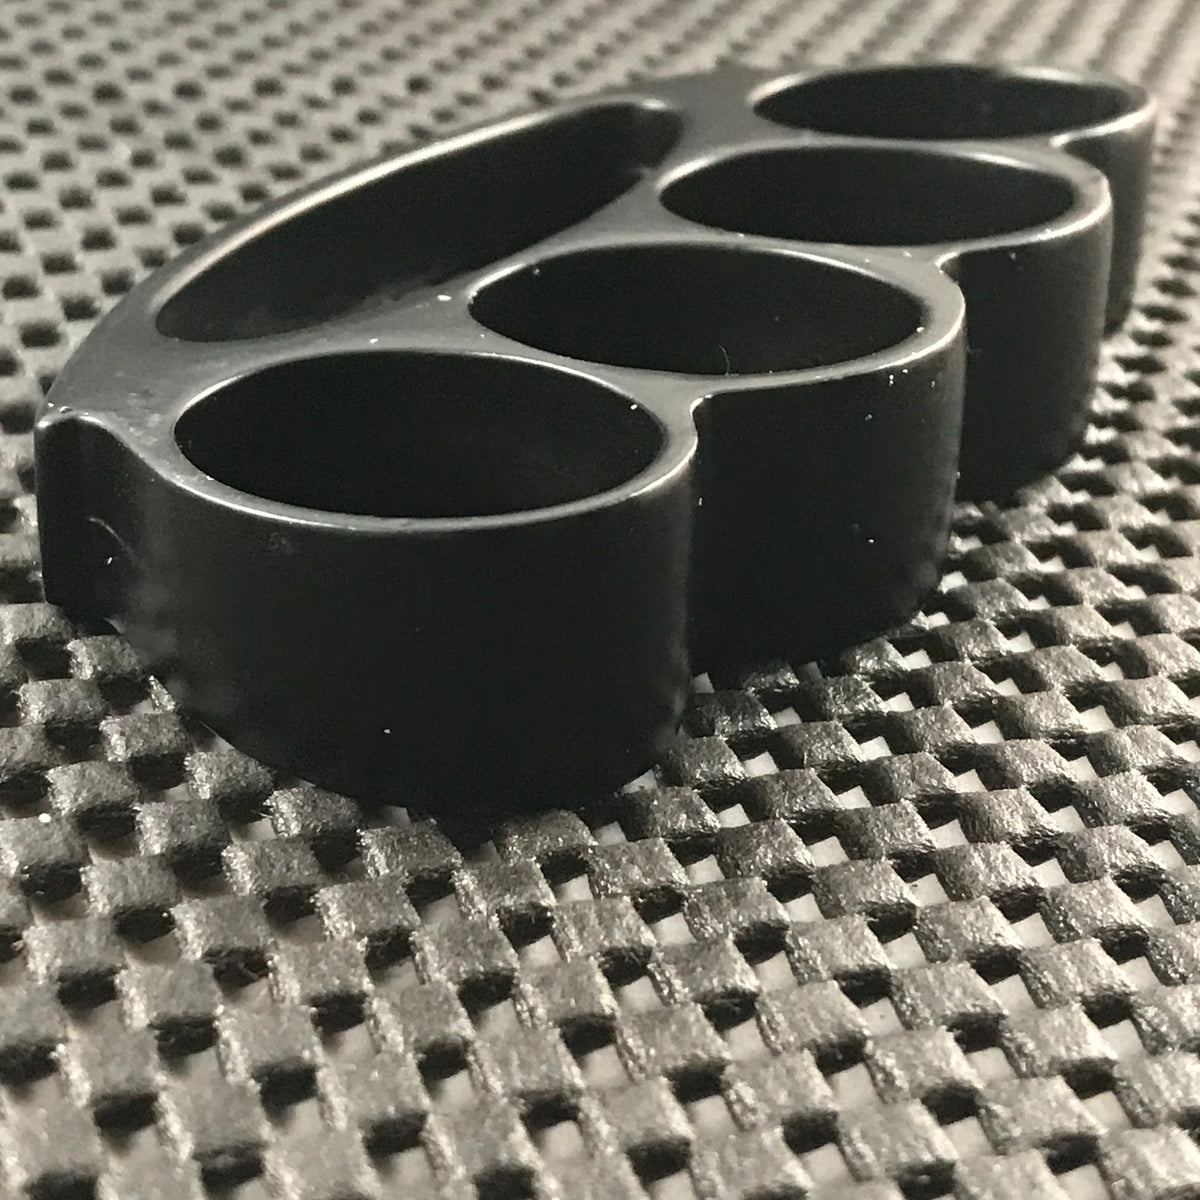 Super powered Brass knuckles for Sale 2019